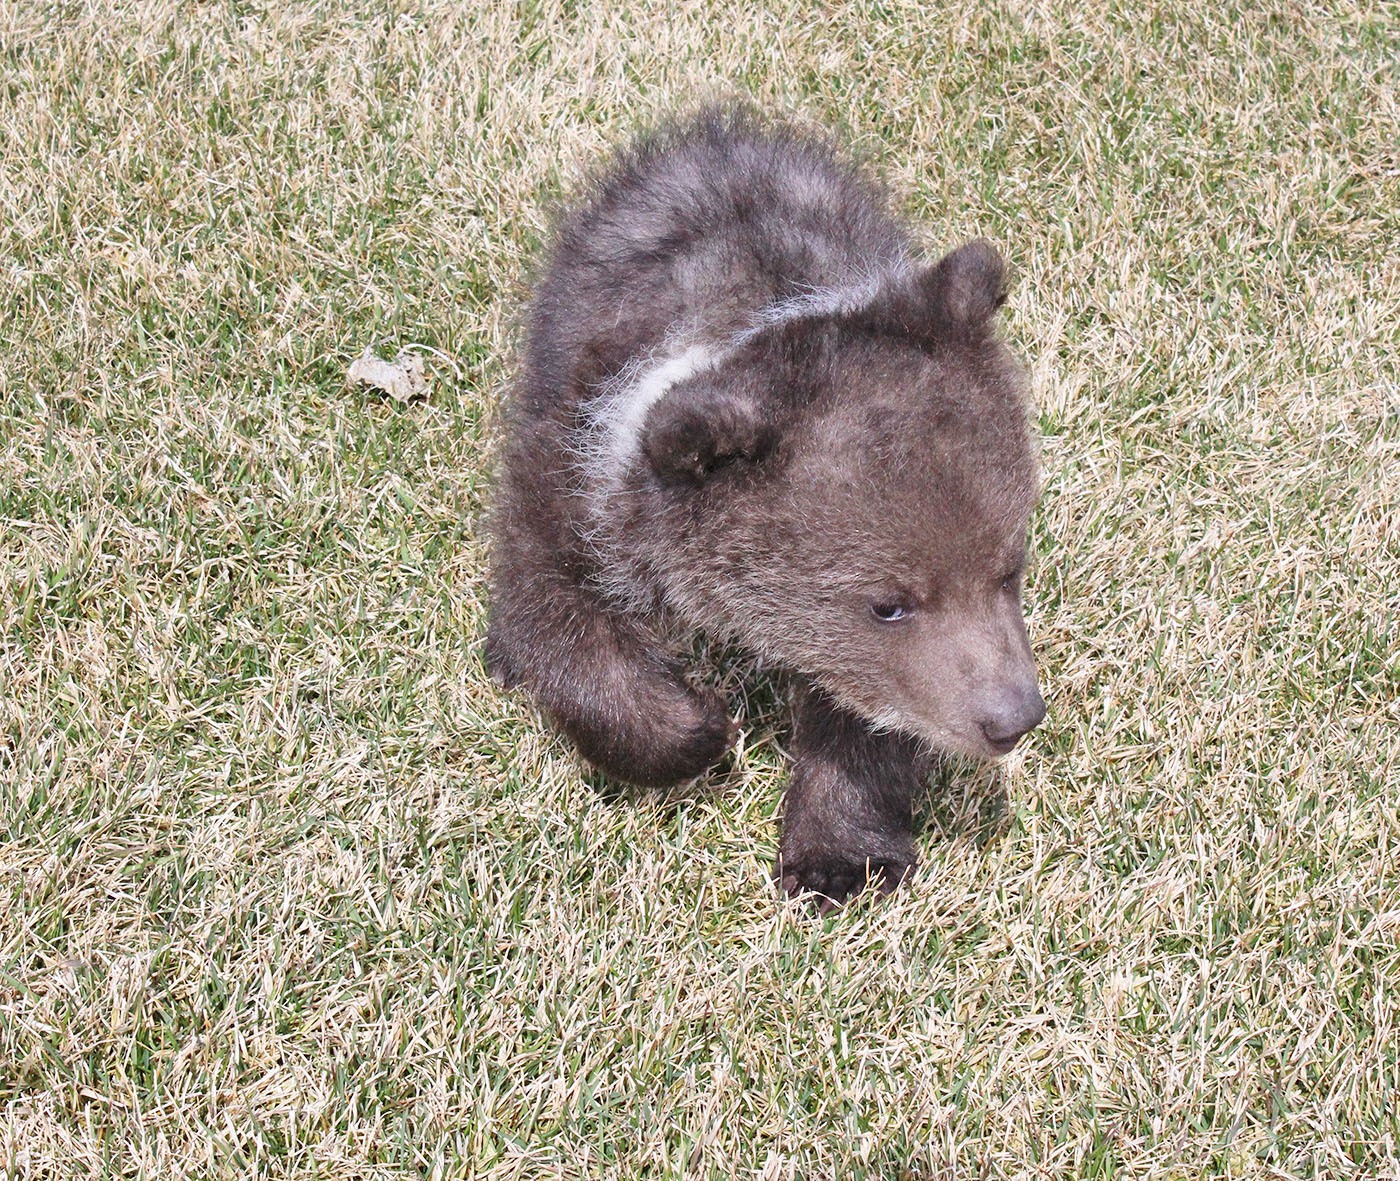 NEWEST ADDITION - Three month old Berkley is the newest addition to Discovery Wildlife Park in Innisfail.